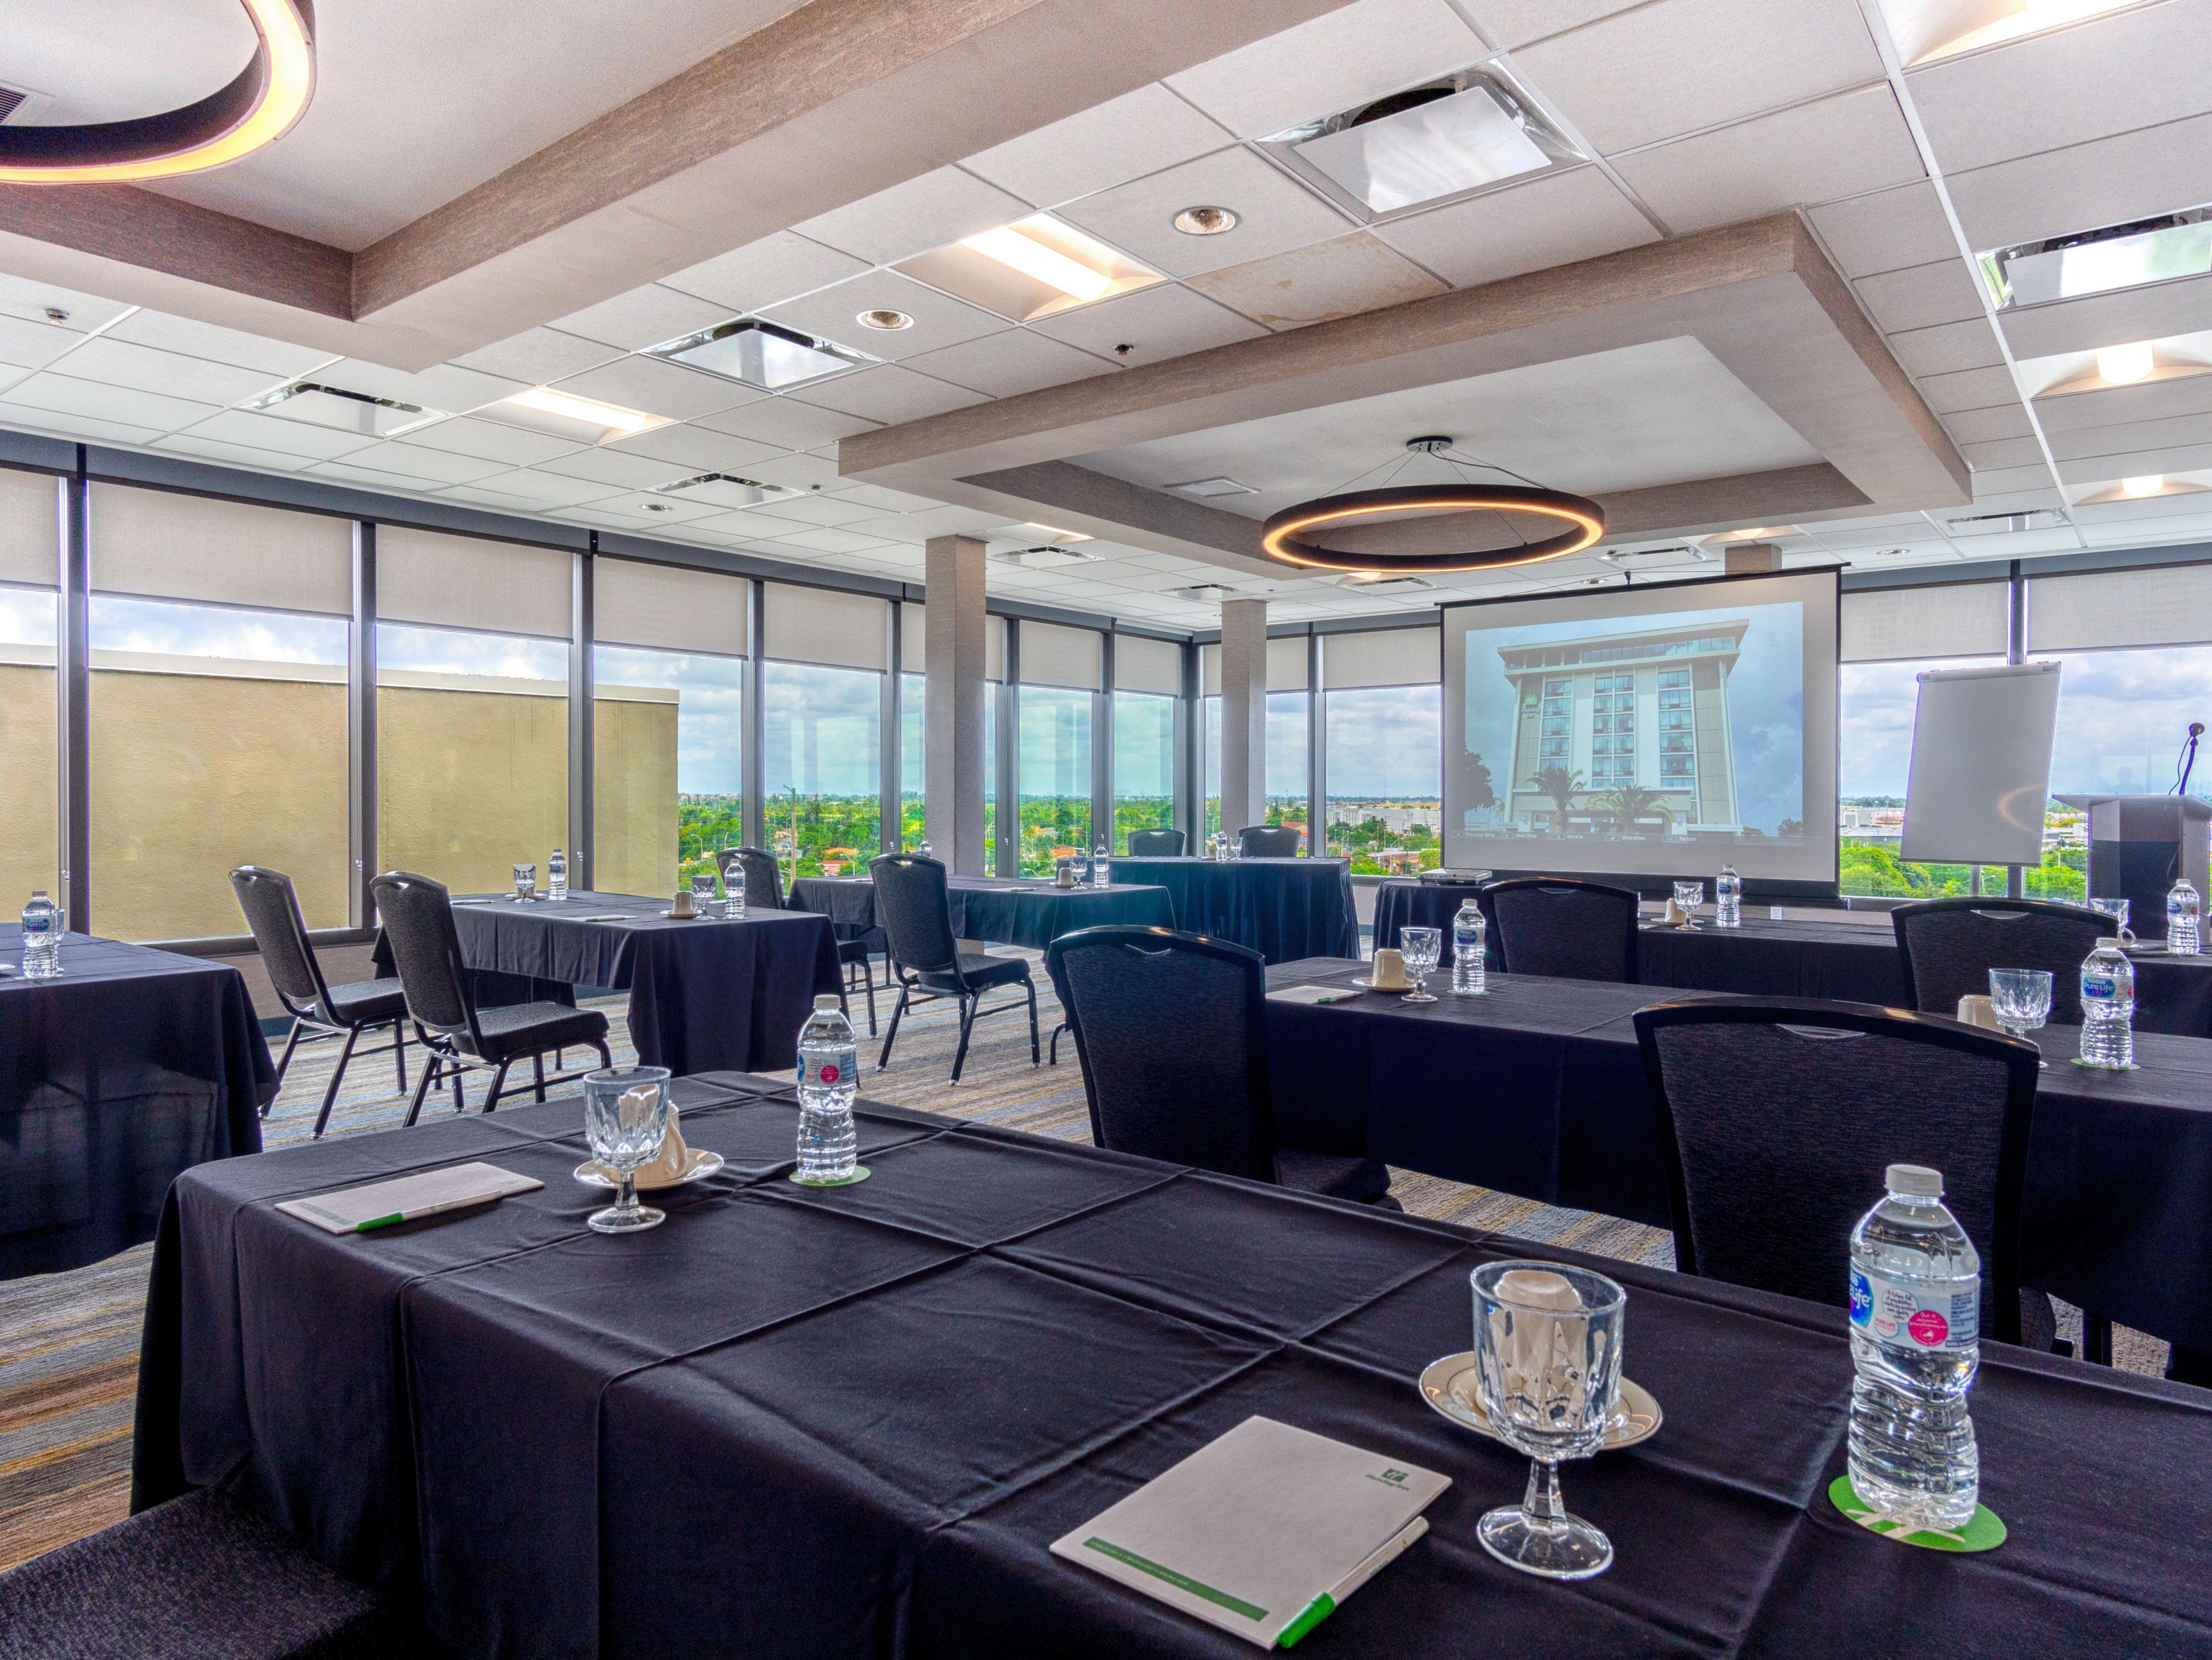 Whether you are a first timer or an experienced organizer we make planning and booking your next meeting room easier than ever. Our staff will help plan each moment, so you can focus on using the meeting space for your best meeting yet.